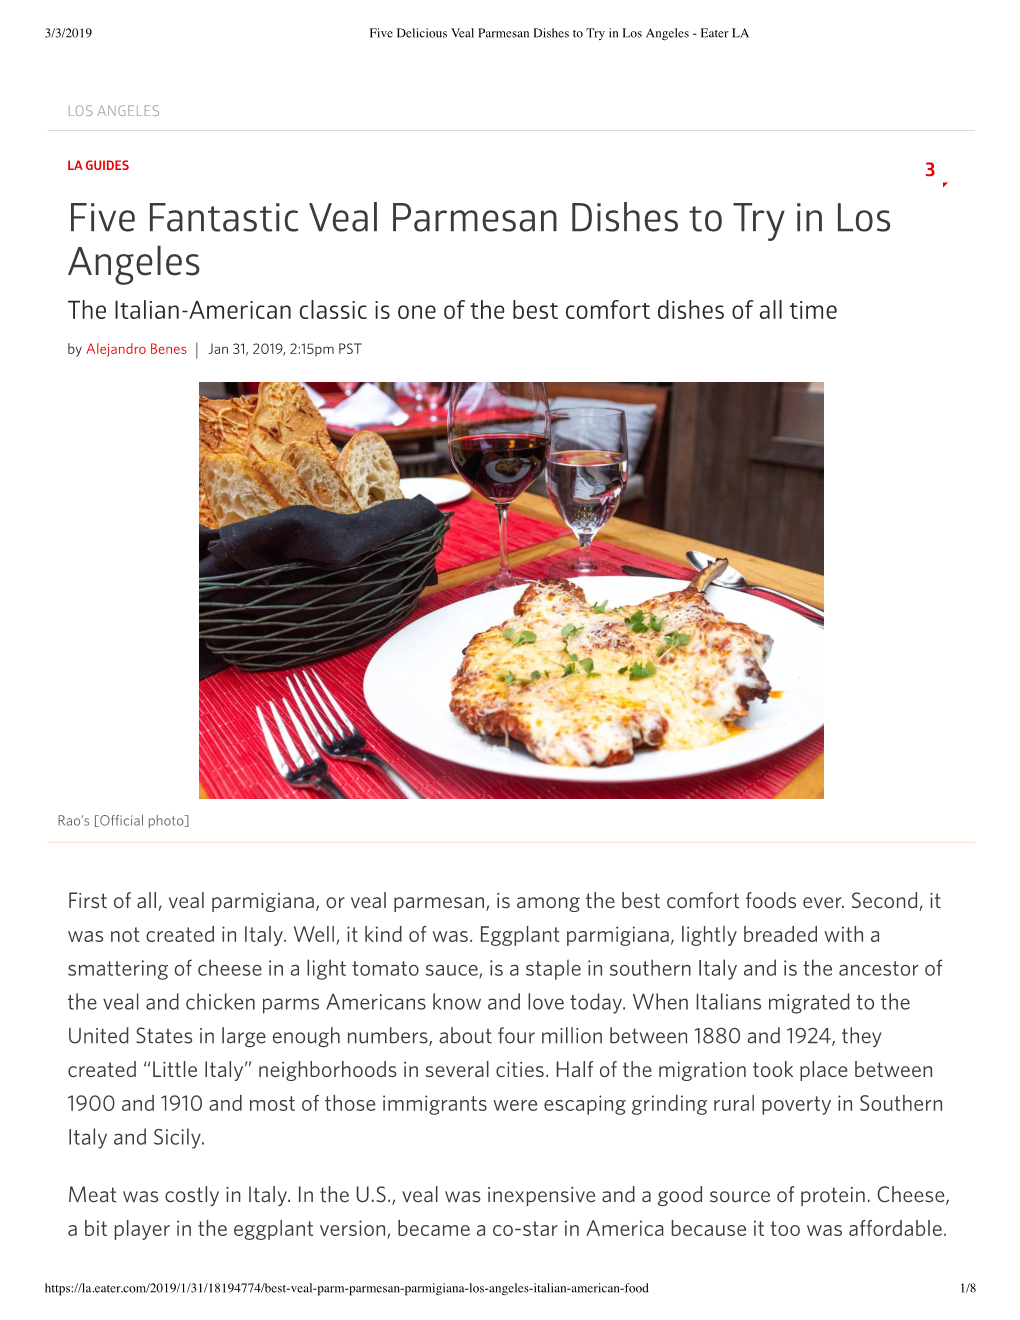 Five Fantastic Veal Parmesan Dishes to Try in Los Angeles